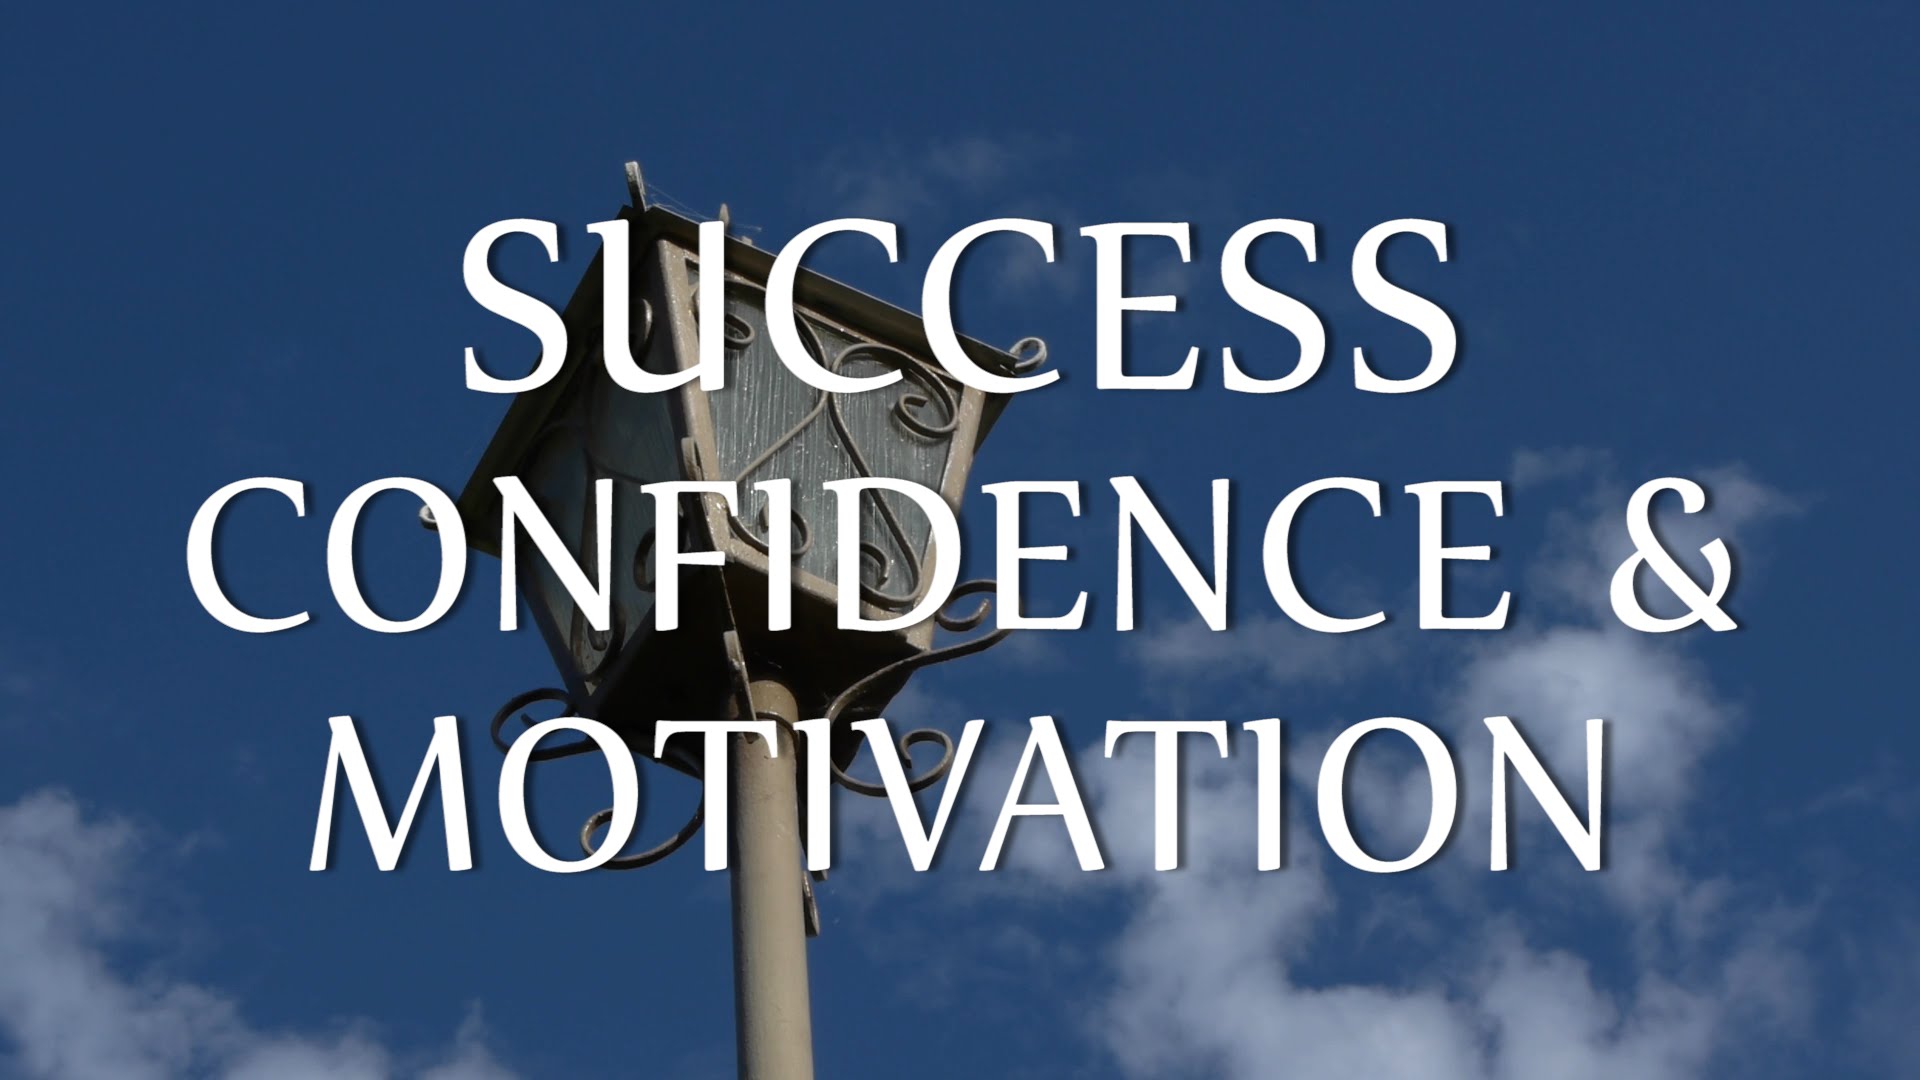 MOTIVATION: SUCCESS for a CSE Aspirant is Defined by their ATTITUDE!